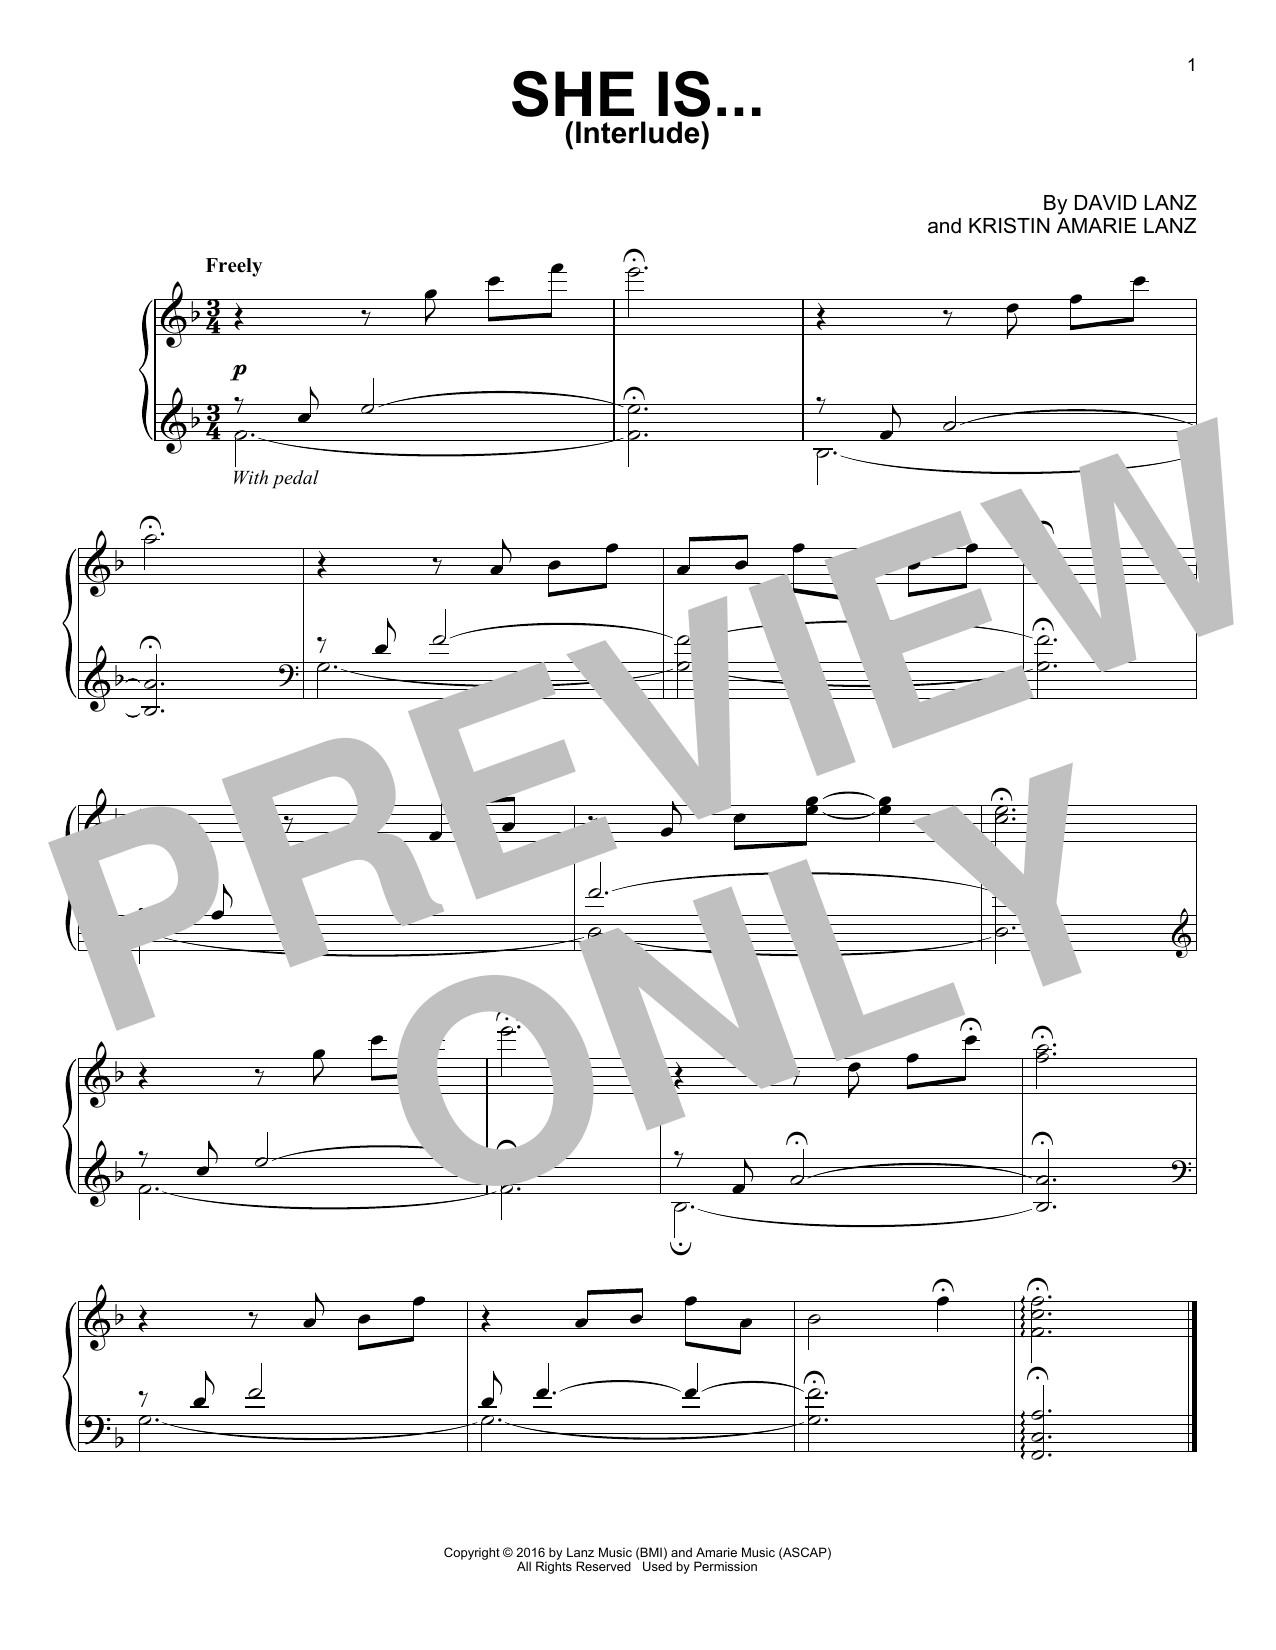 David Lanz She Is...(Interlude) sheet music notes and chords. Download Printable PDF.